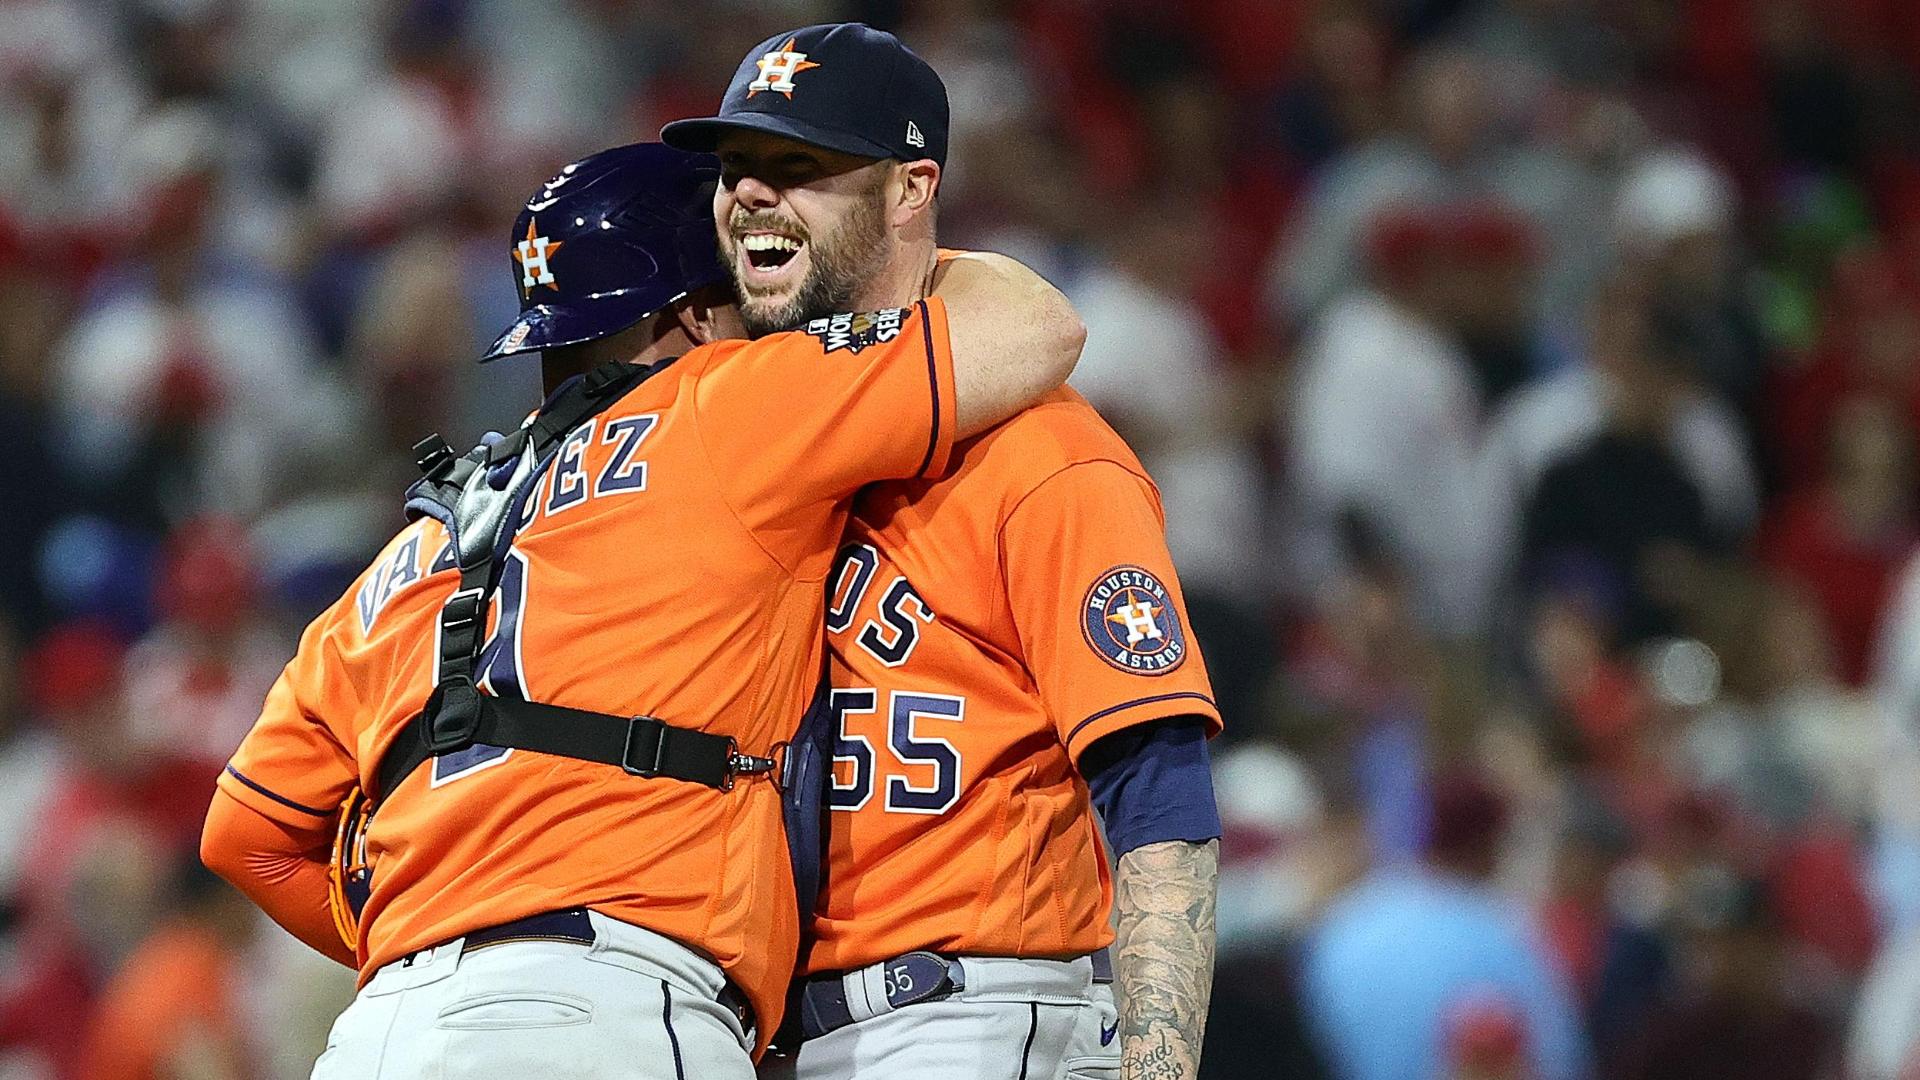 Astros complete firstever combined nohitter in the World Series